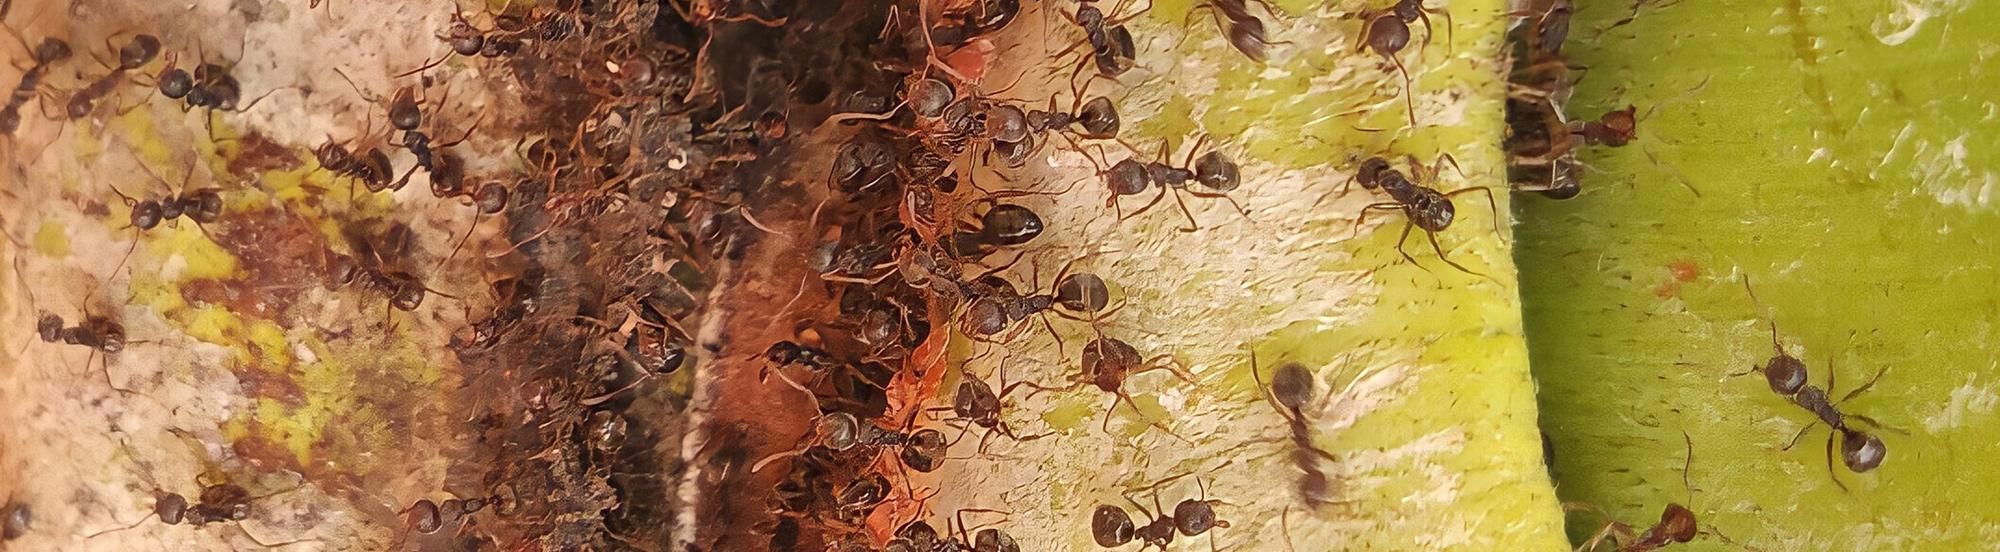 little black ants searching for food